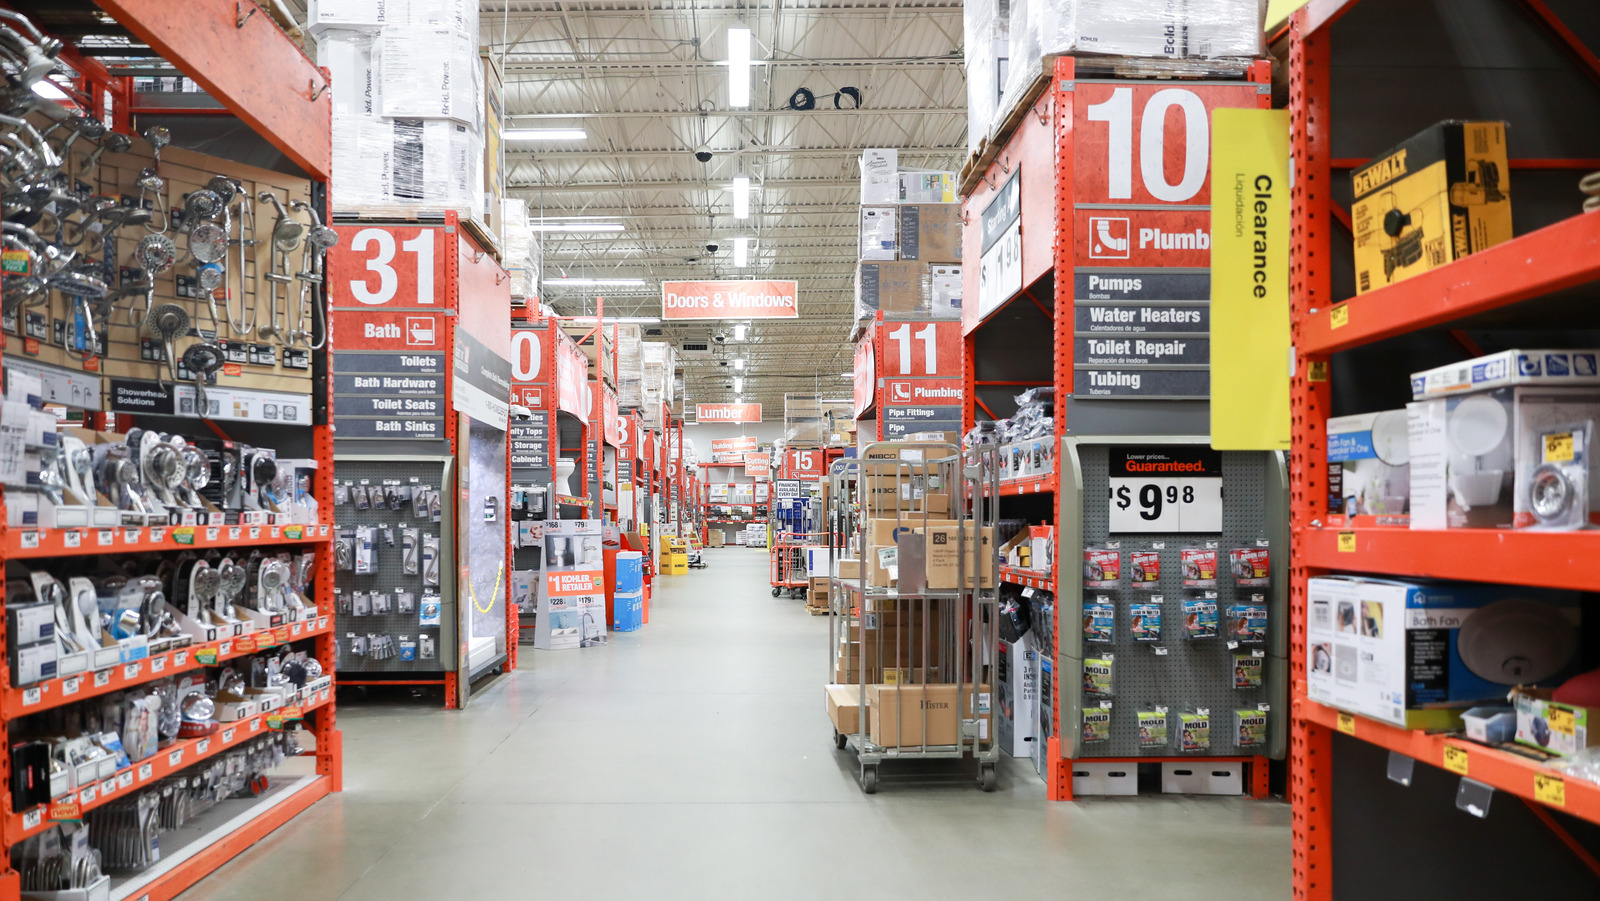 I Visited a Huge Super Home Depot, and it Was Awesome!